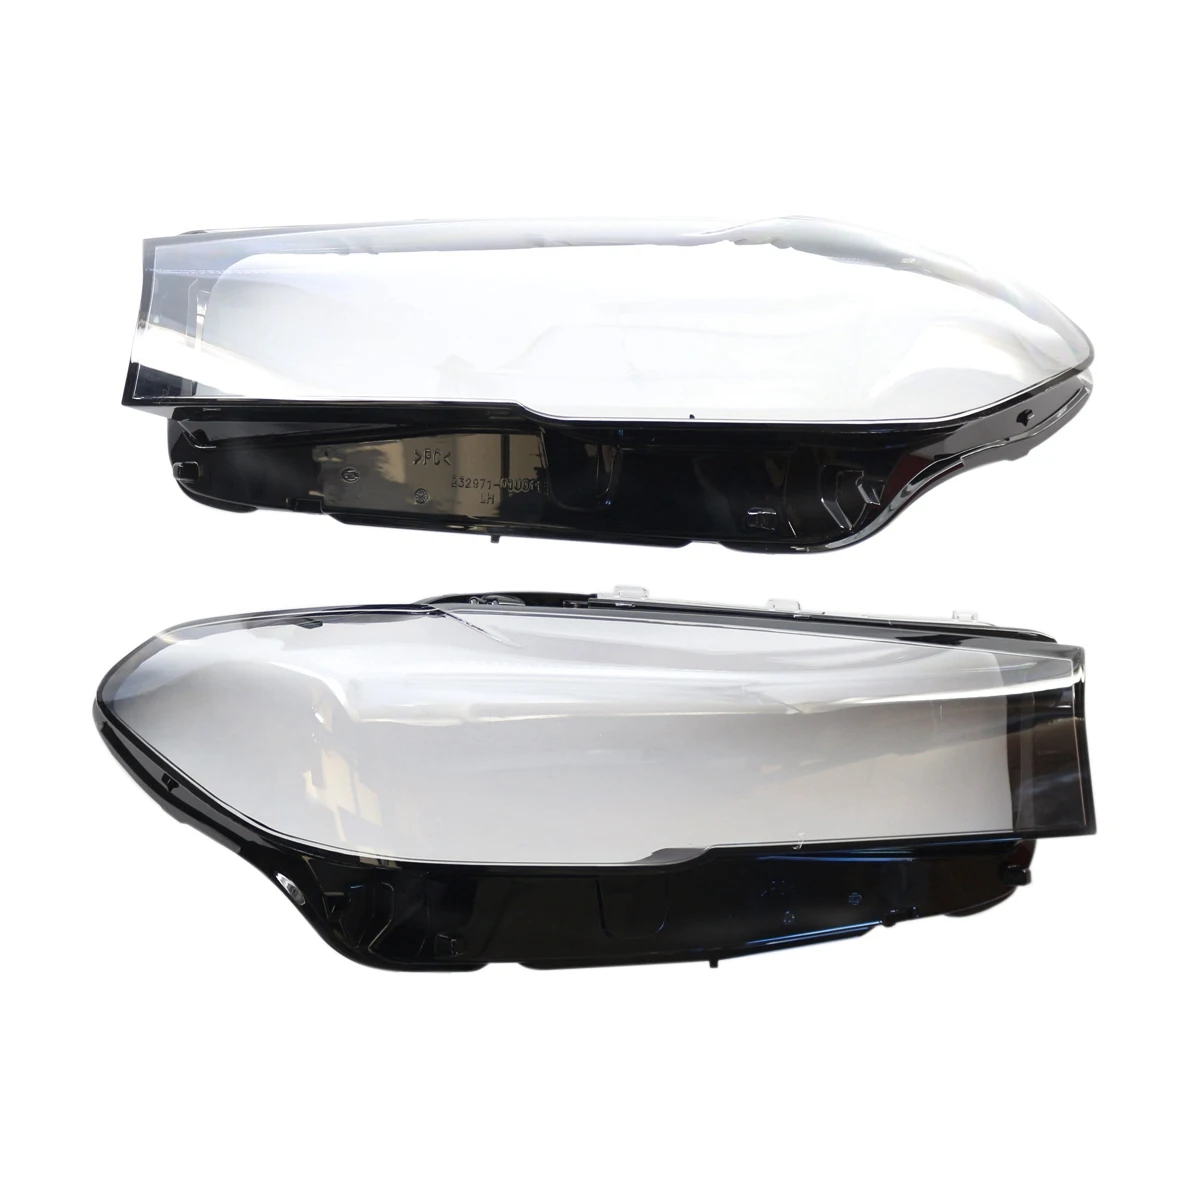 

Car Front Headlamp Caps for -BMW 5 Series G30 G31 F90 M5 LCI 2020-2022 Headlight Cover Auto Lampshade Lamp Lens Shell